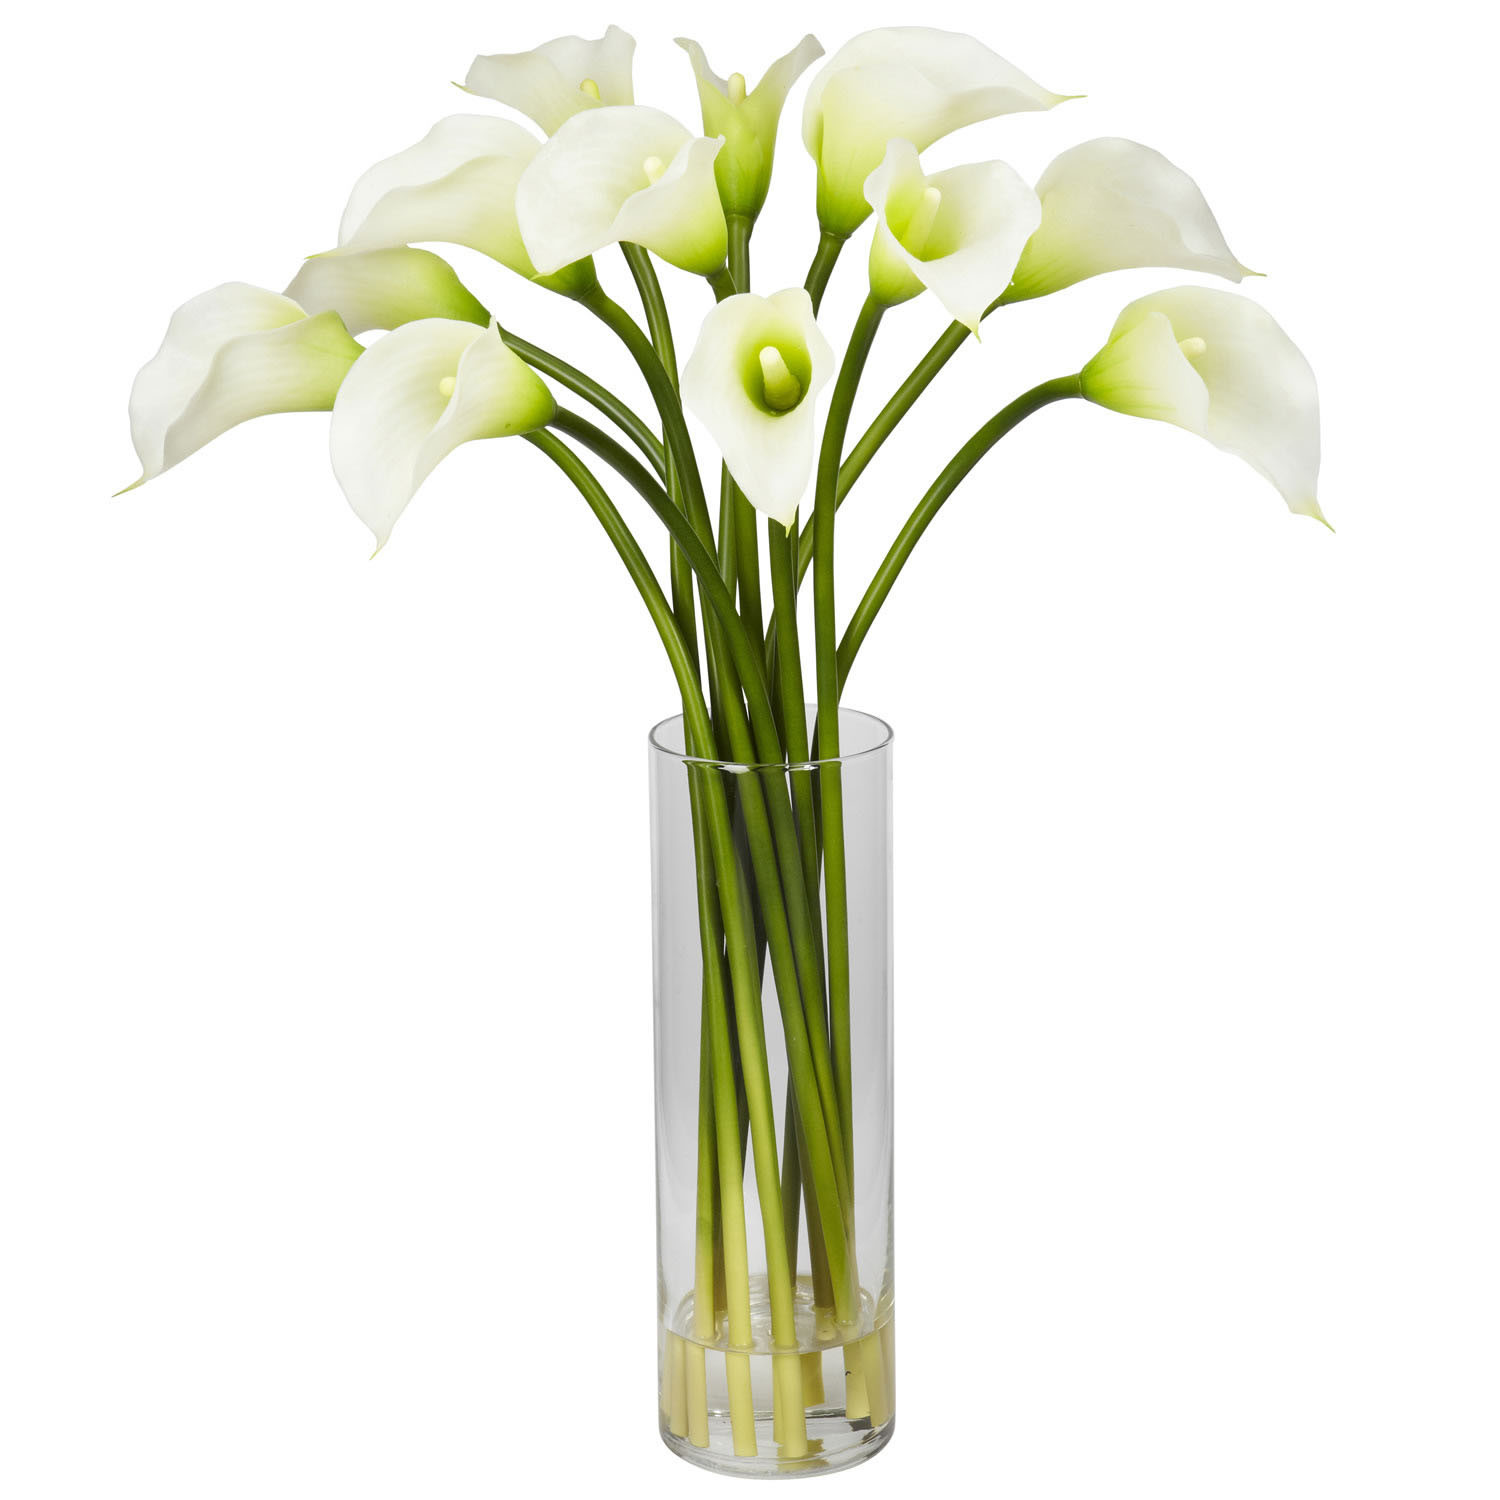 18 Popular Tall Vase with Artificial Flowers 2022 free download tall vase with artificial flowers of decorme decorme silk flowers decorme throughout nea2169 zm 1